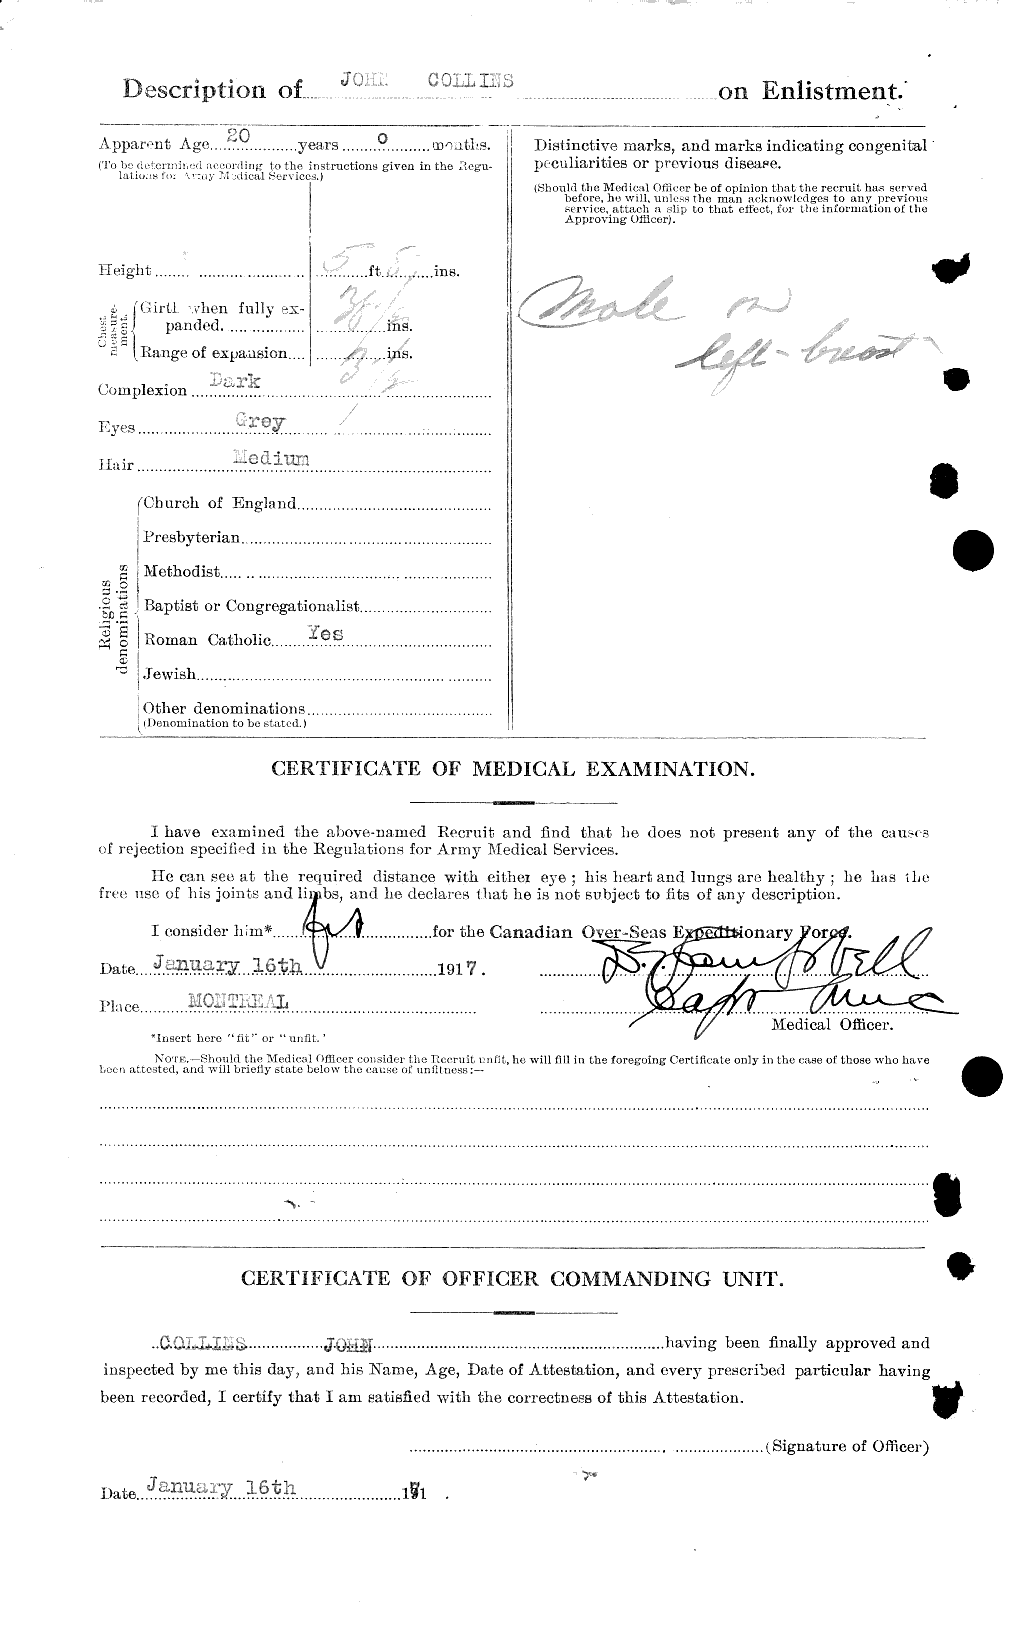 Personnel Records of the First World War - CEF 037992b